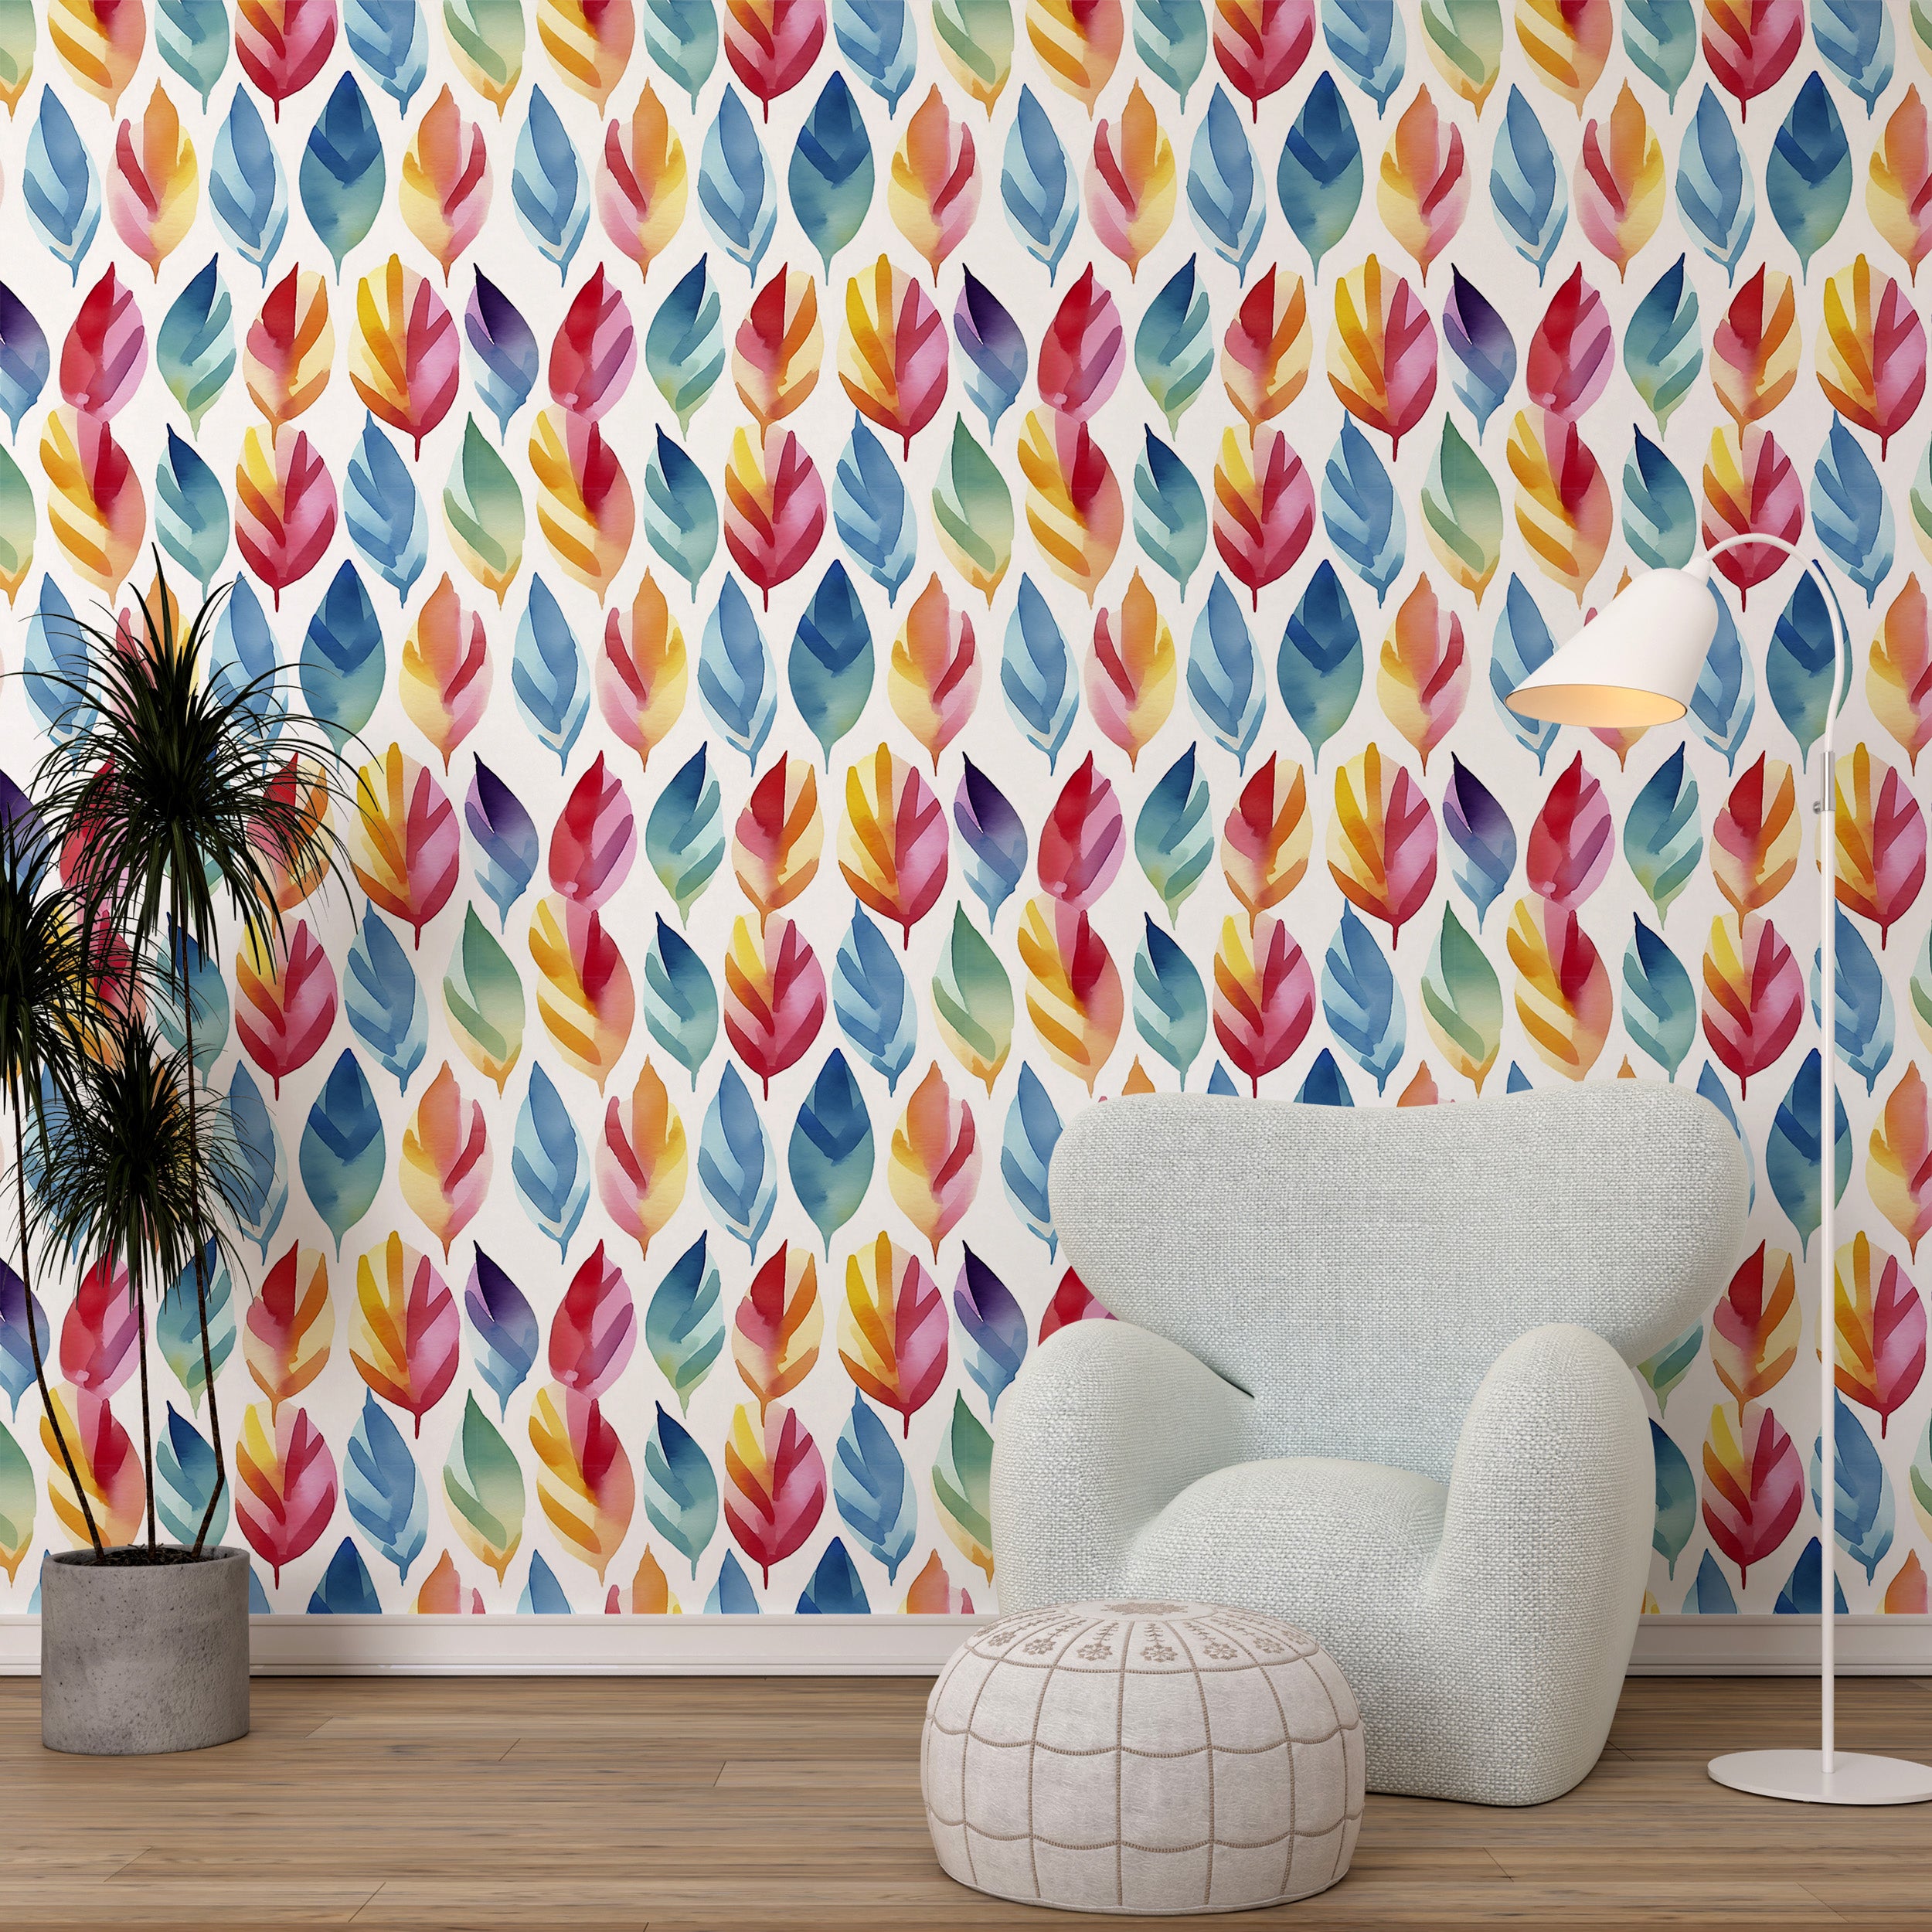 Colorful Leaves Wallpaper for Nursery Decor